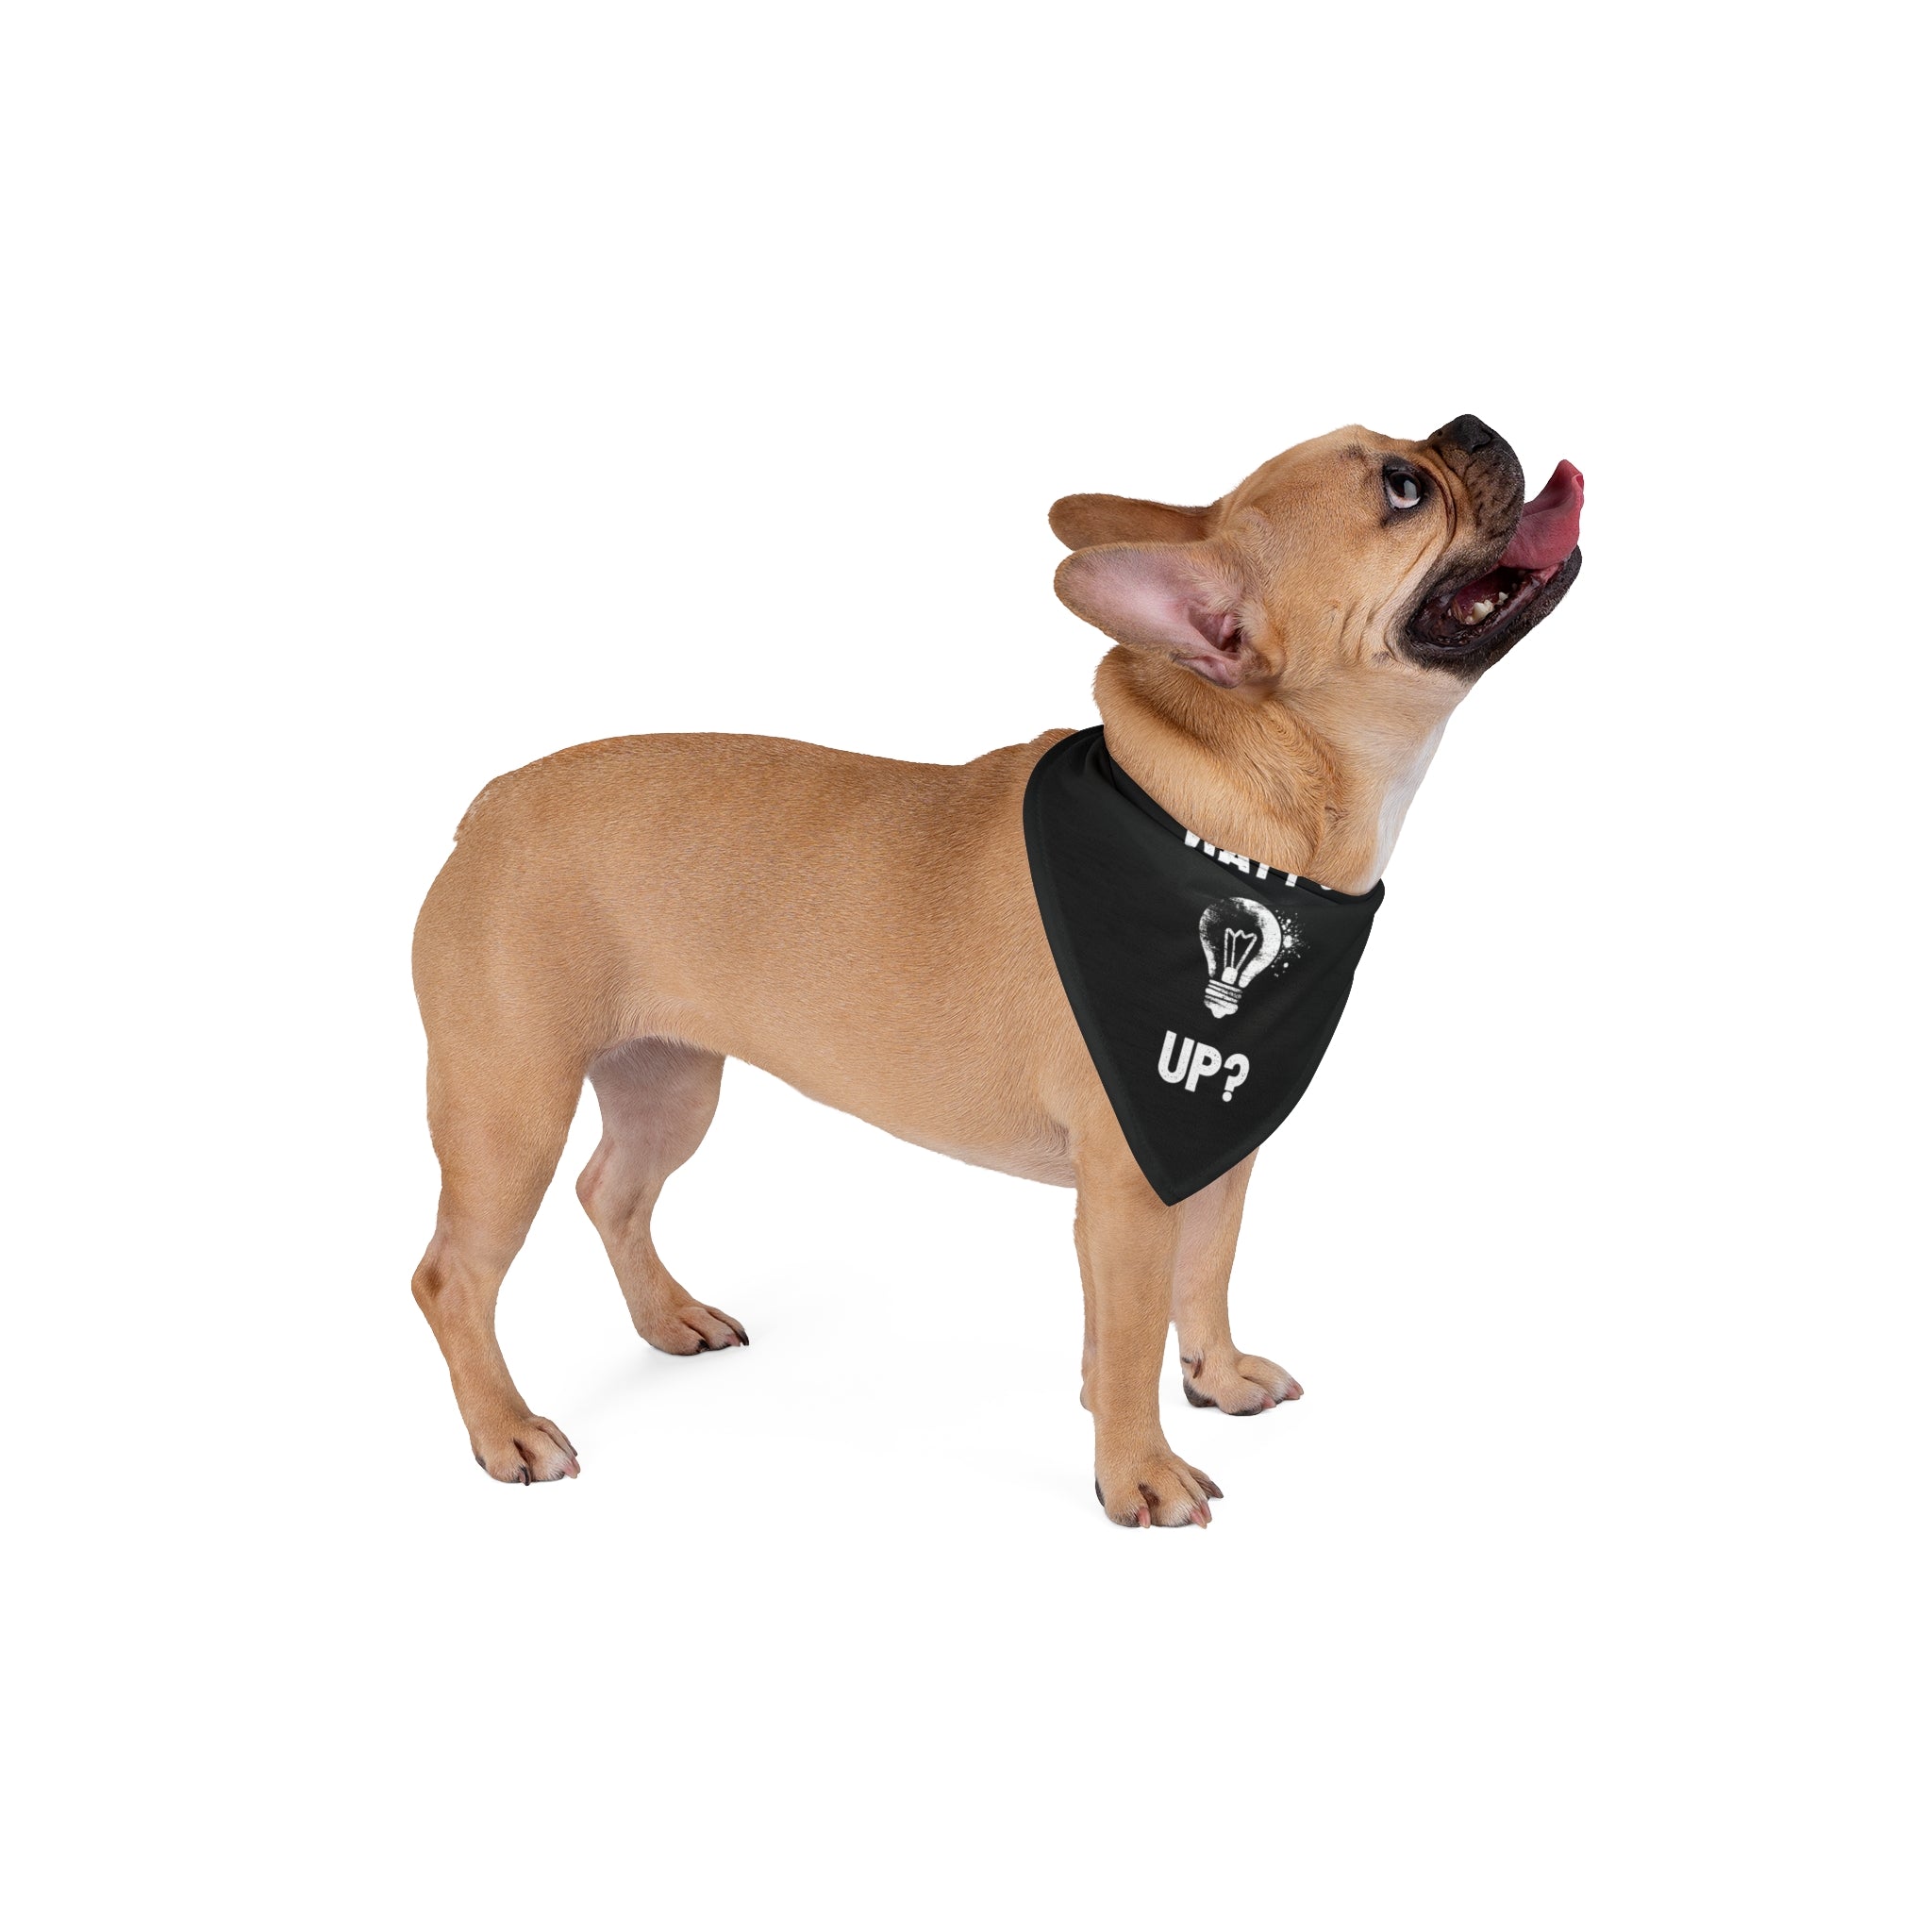 A small tan dog wearing a Watts Up - Pet Bandana made of spun polyester with white text that reads "UP?" looks upward with its tongue out, blending style and comfort effortlessly.